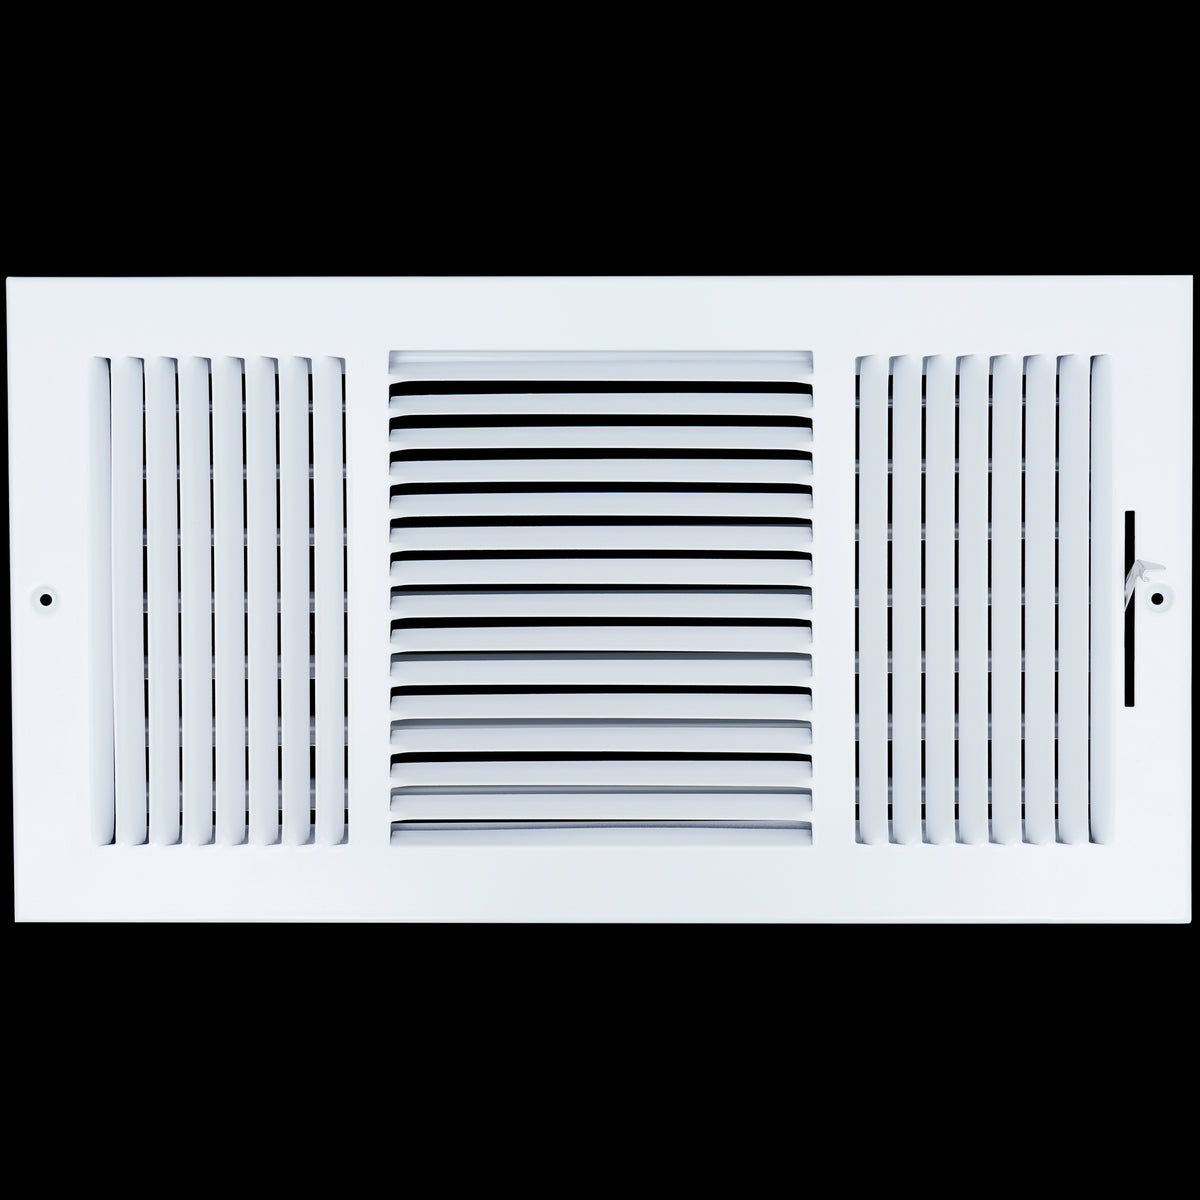 airgrilles 16 x 8 duct opening  -  3 way steel air supply diffuser for sidewall and ceiling hnd-asg-wh-3way-16x8 764613097573 - 1